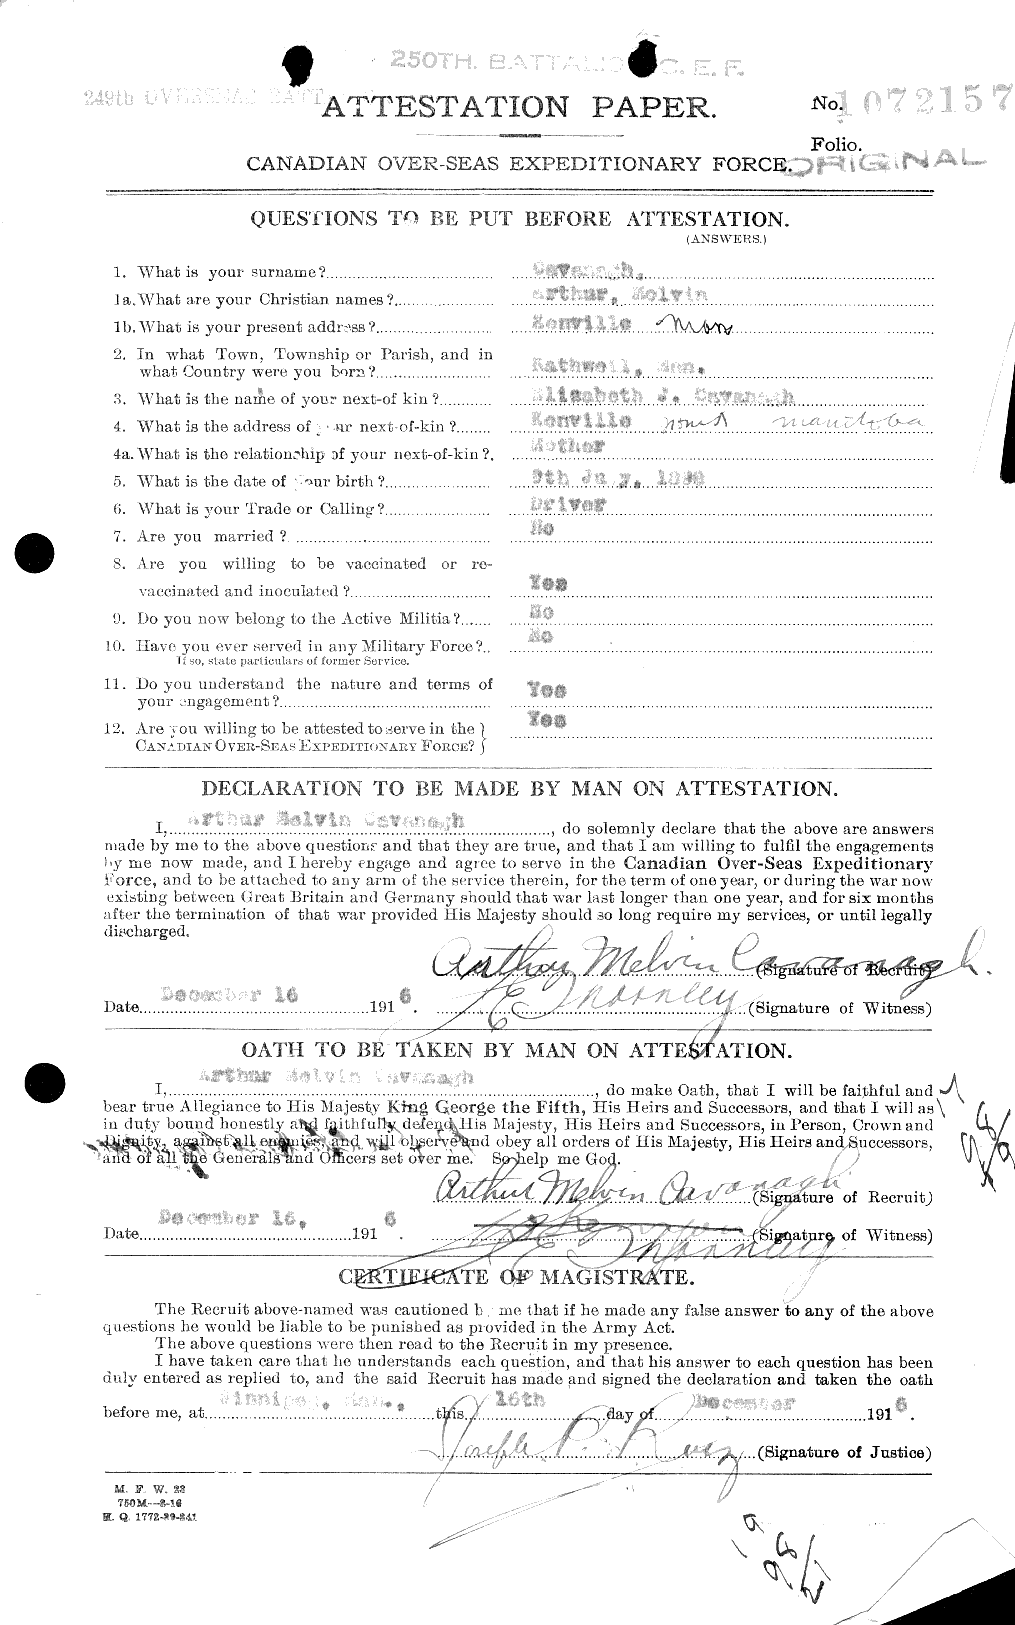 Personnel Records of the First World War - CEF 007586a